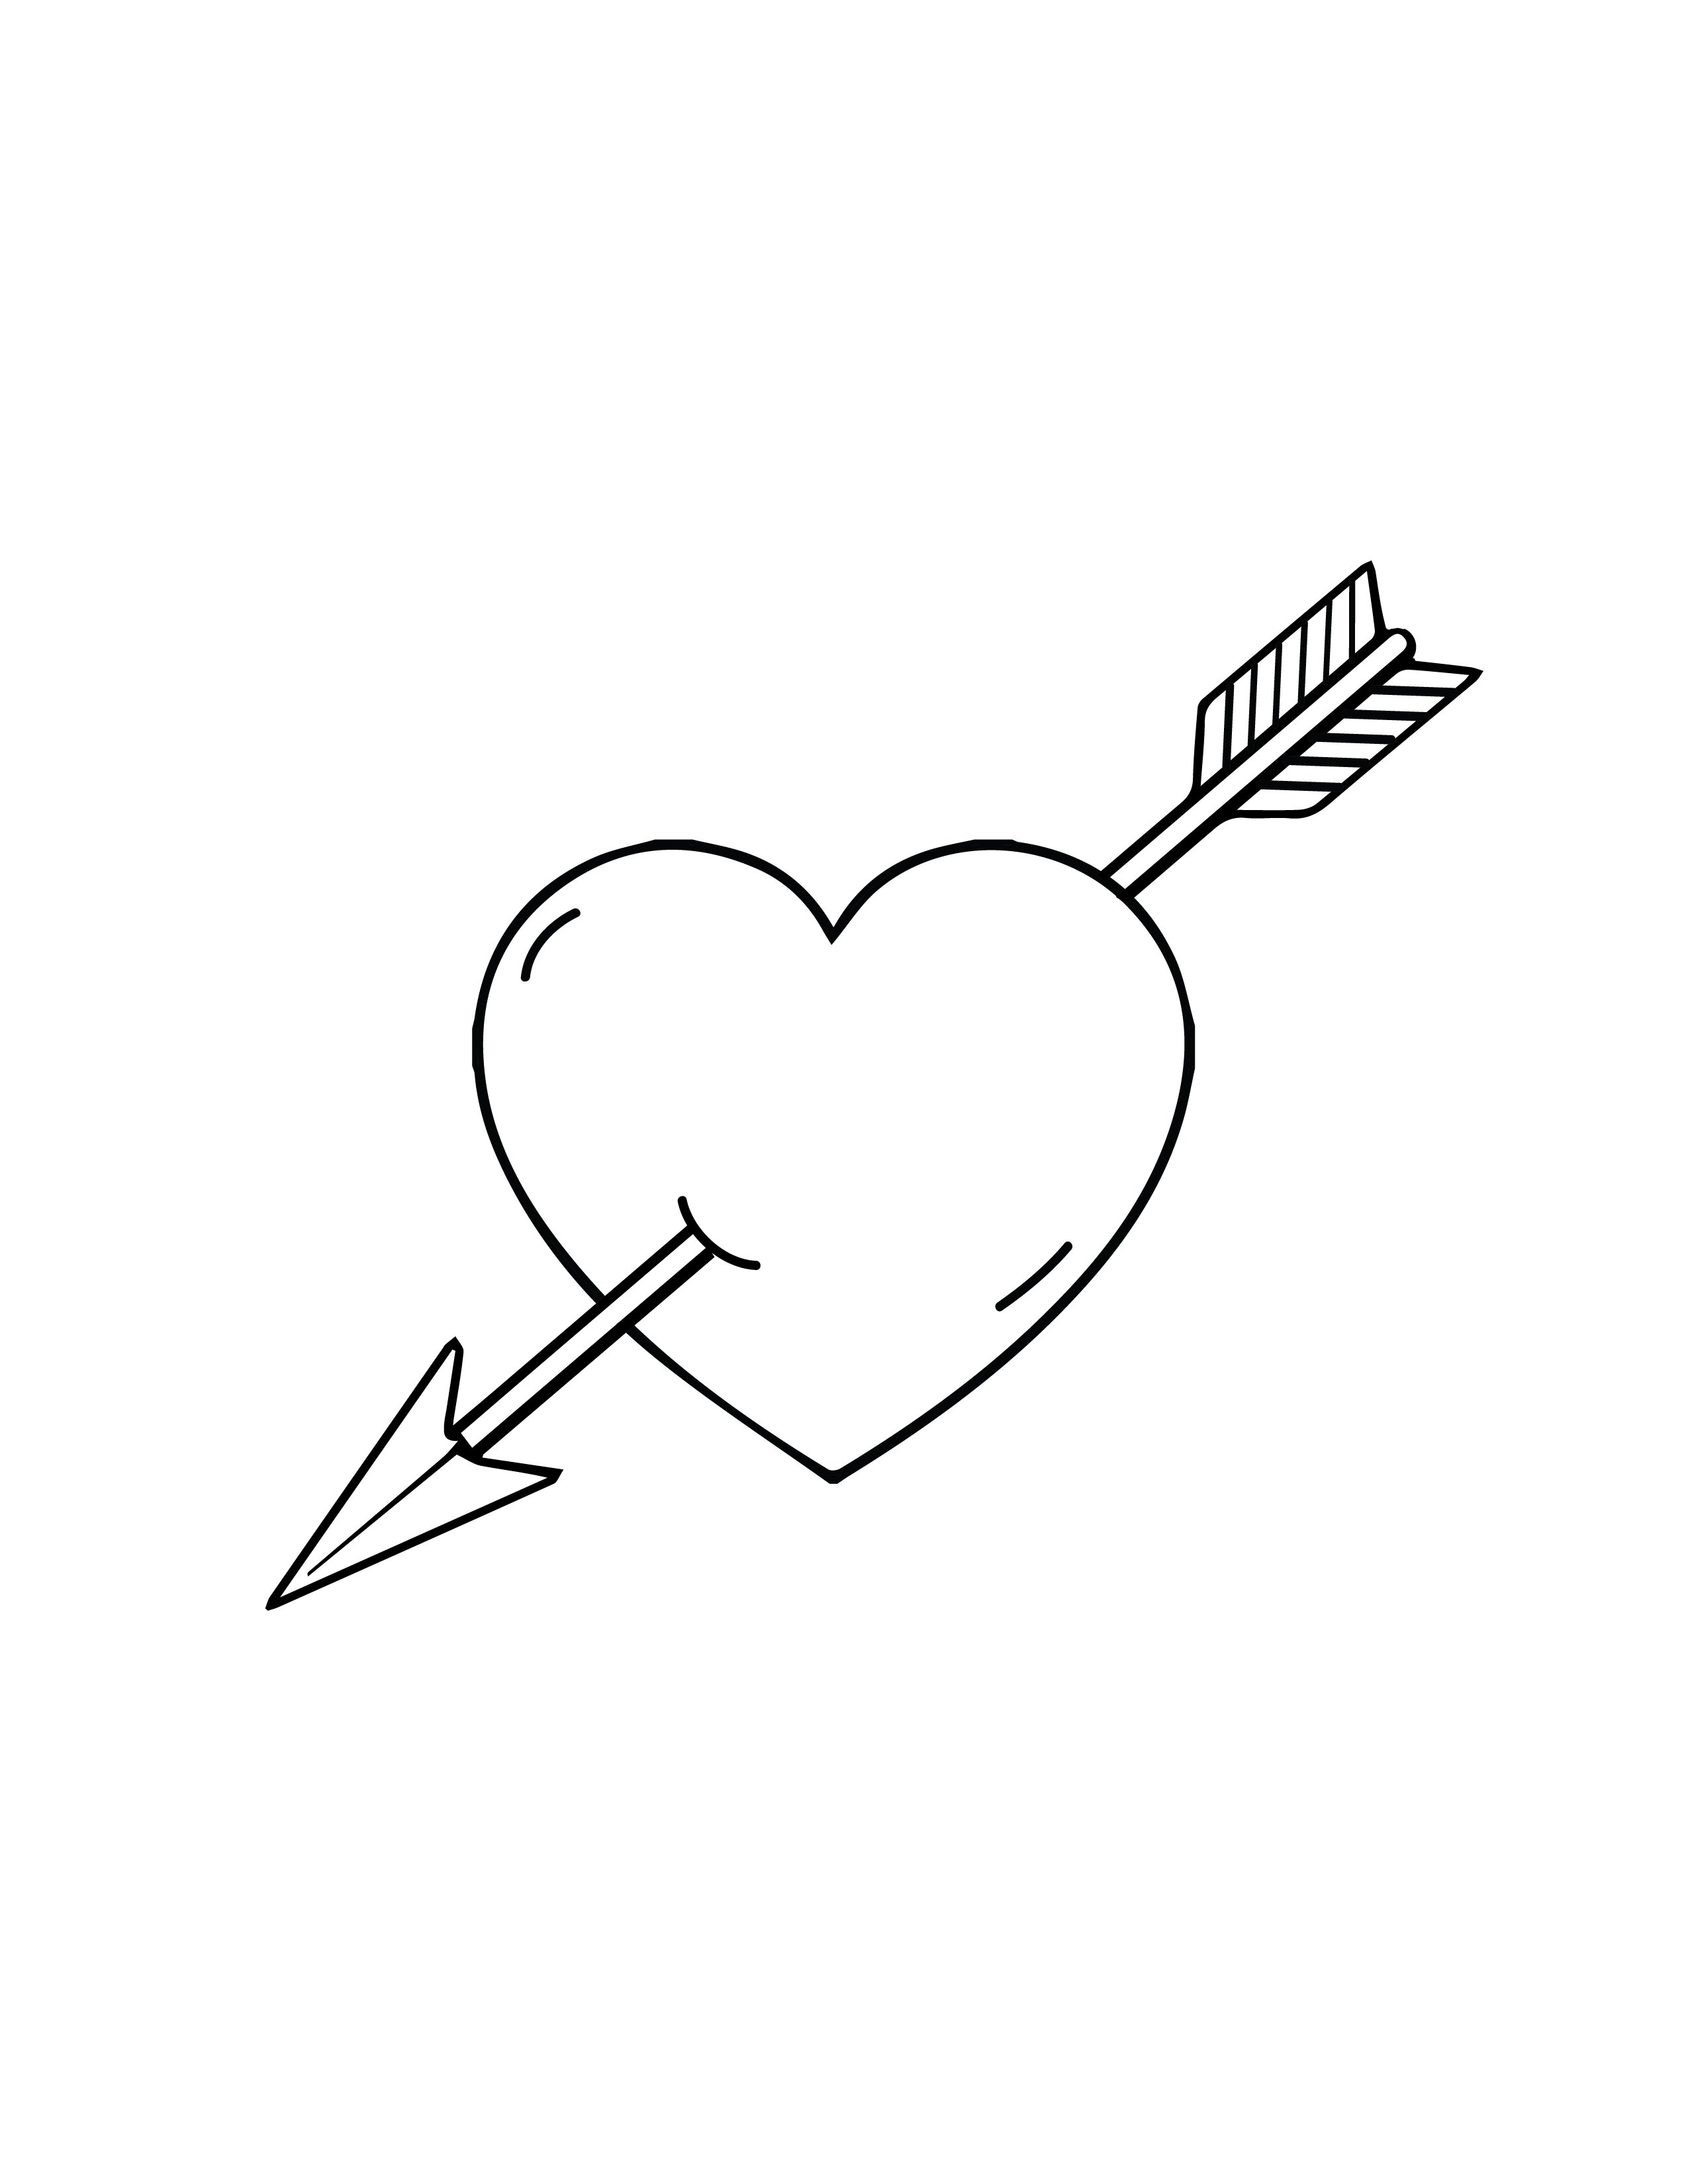 Free Heart With Arrow Pencil Drawing EPS, Illustrator, JPG, PNG, PDF